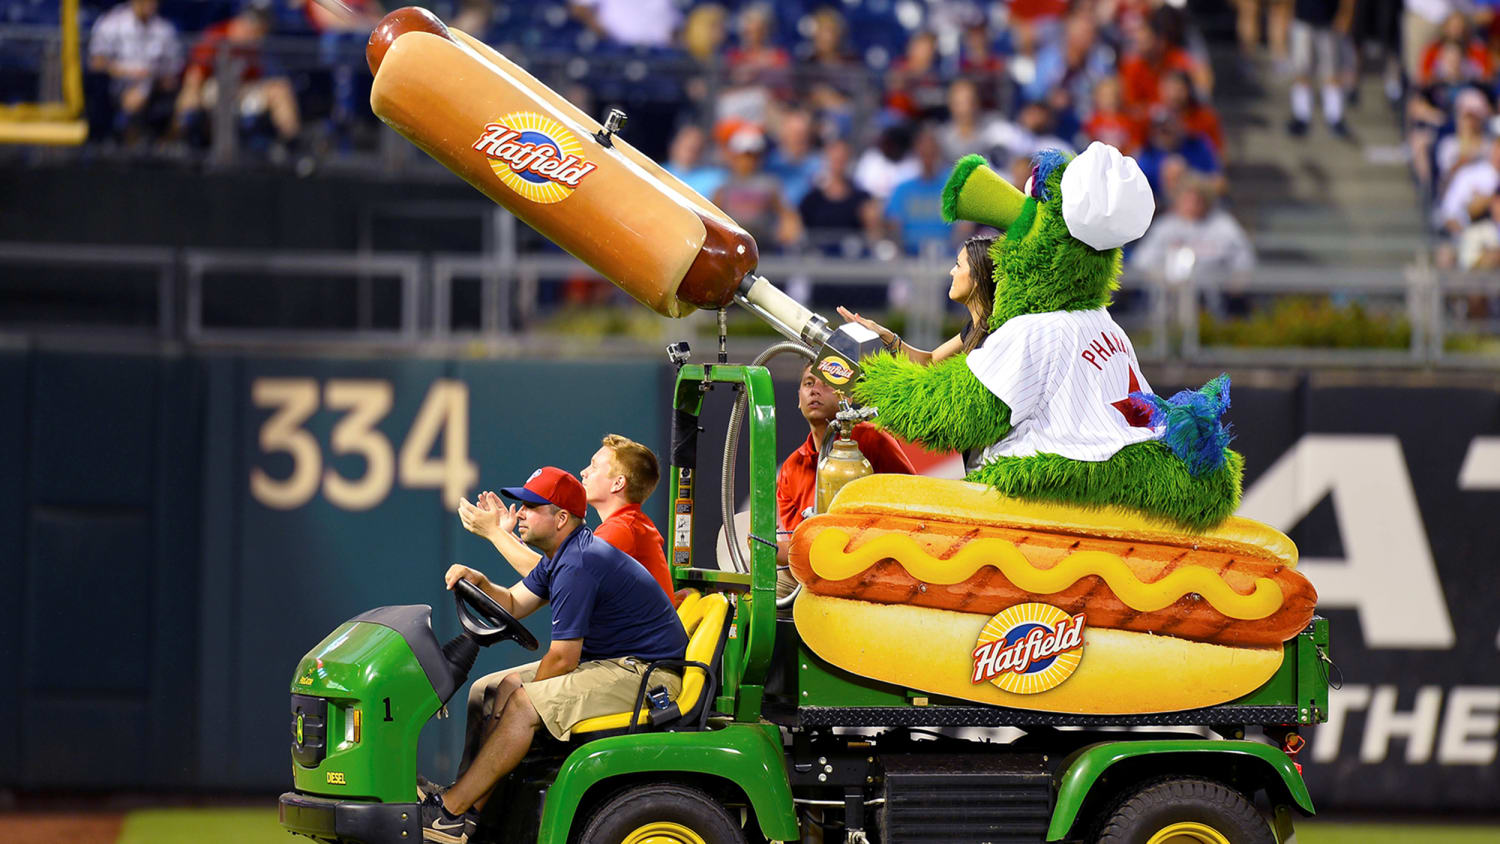 Woman hit in the face with hot dog cannon by Phillie Phanatic